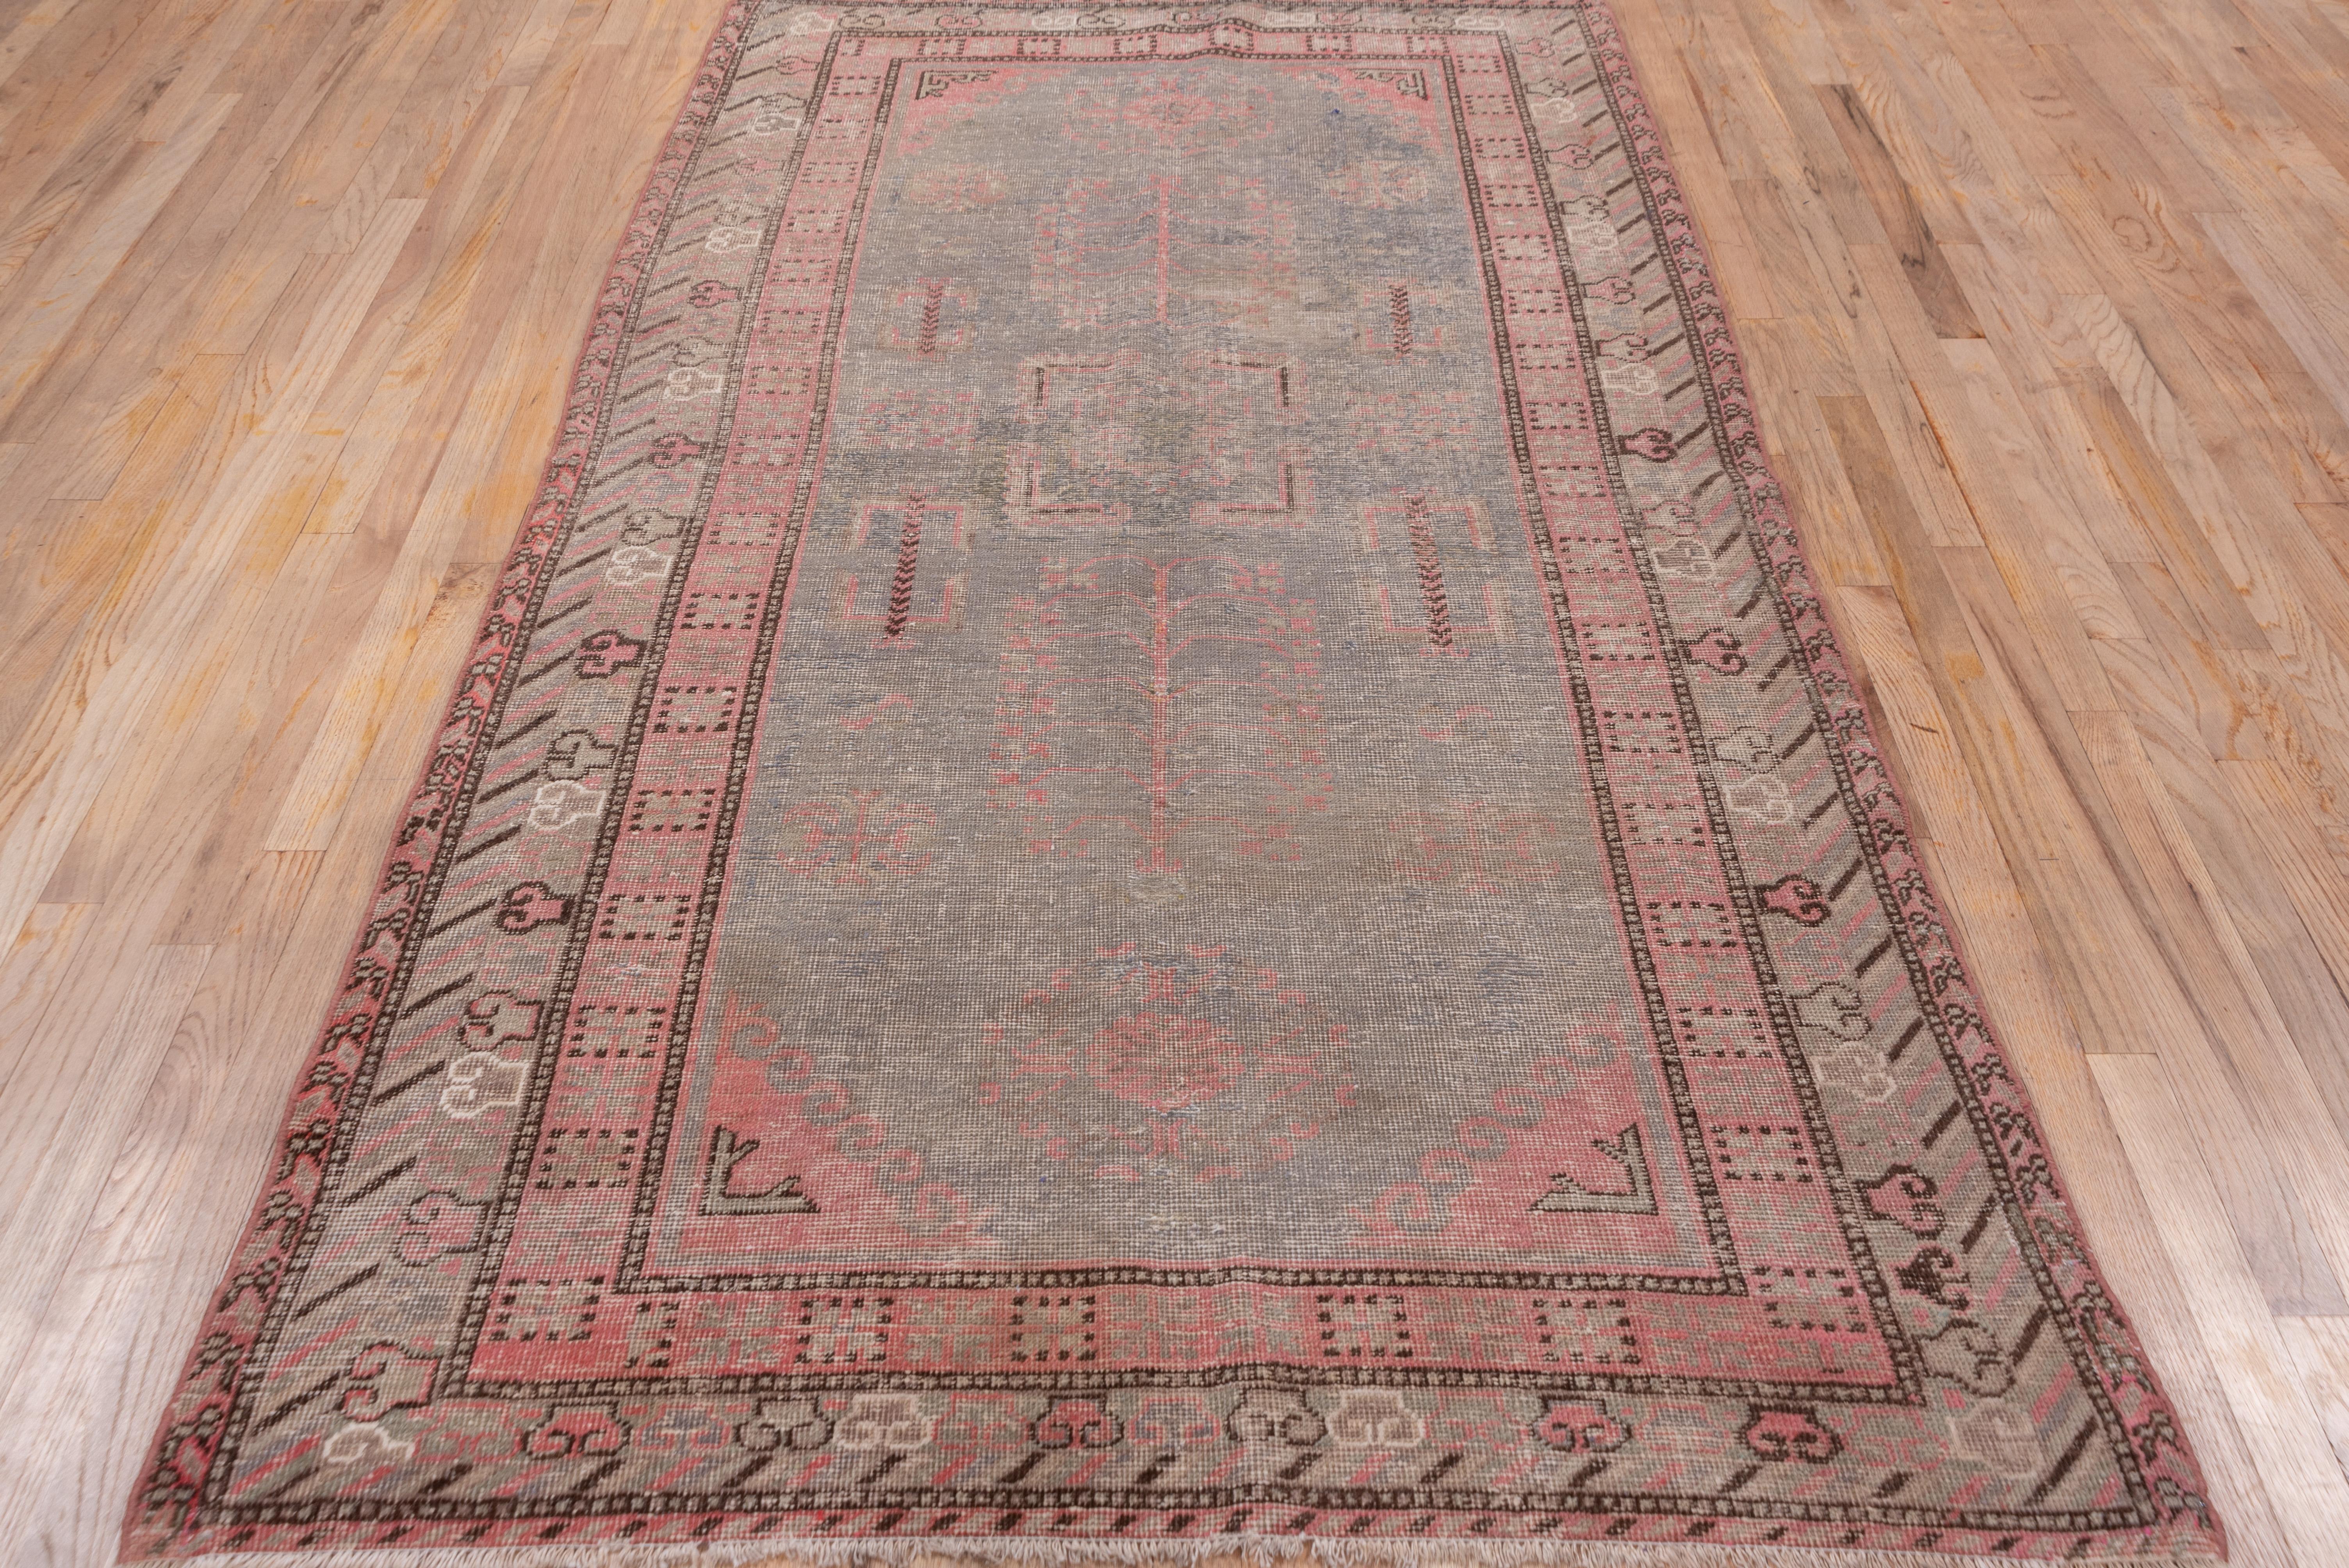 Hand-Knotted Antique Khotan Rug, Light Gray Field, Pink Borders, Lighly Distressed For Sale